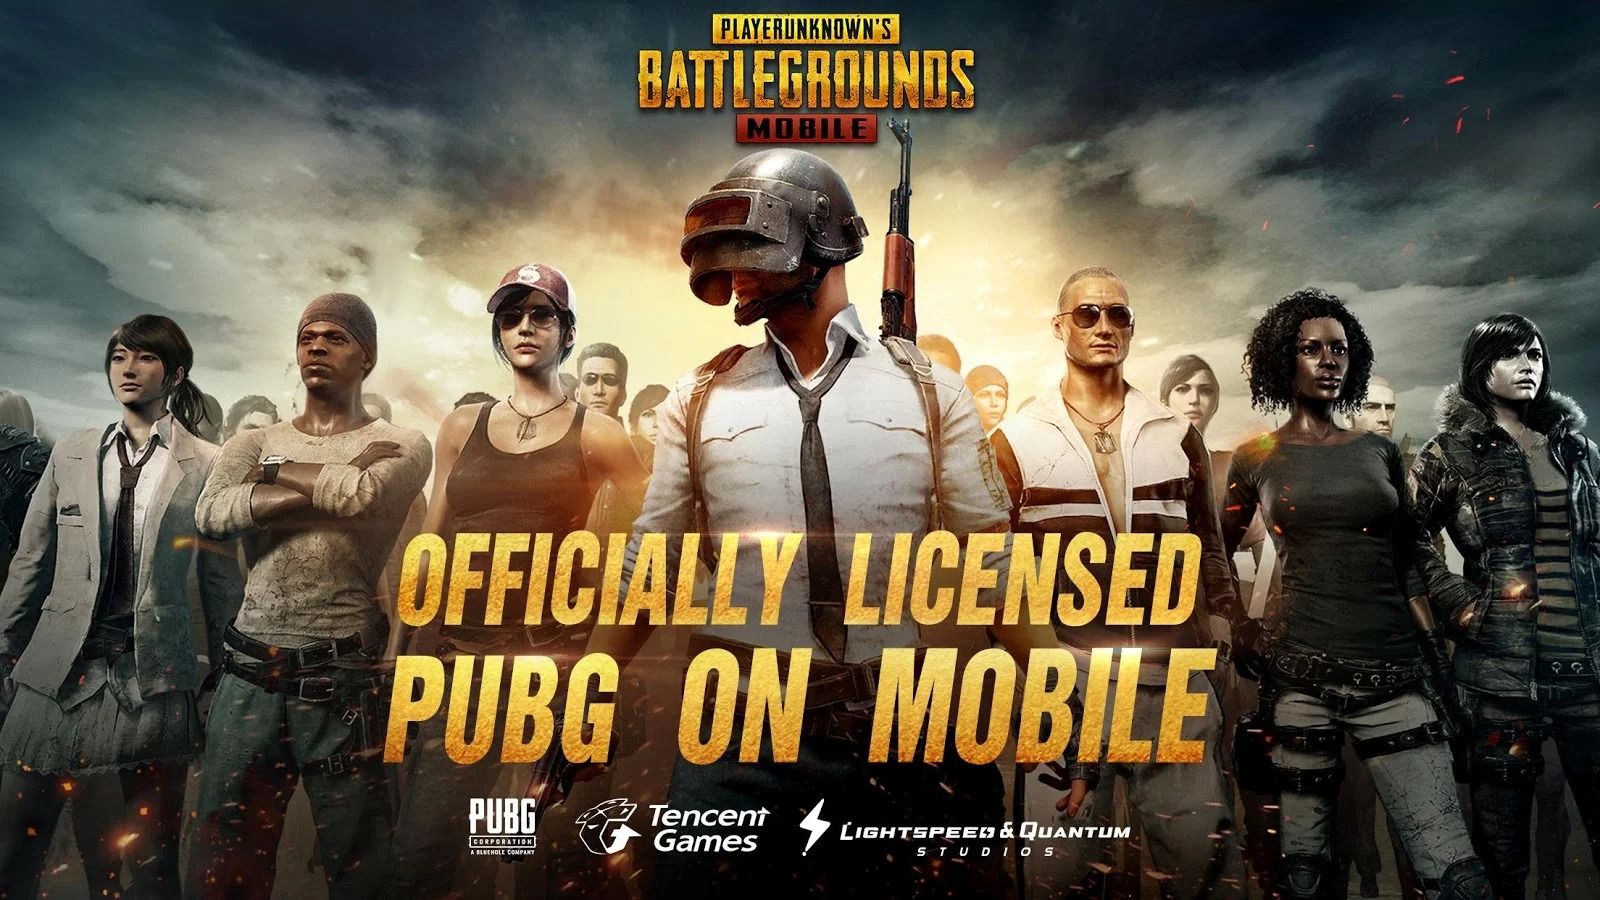 You're not actually good at PUBG mobile, it's full of bots